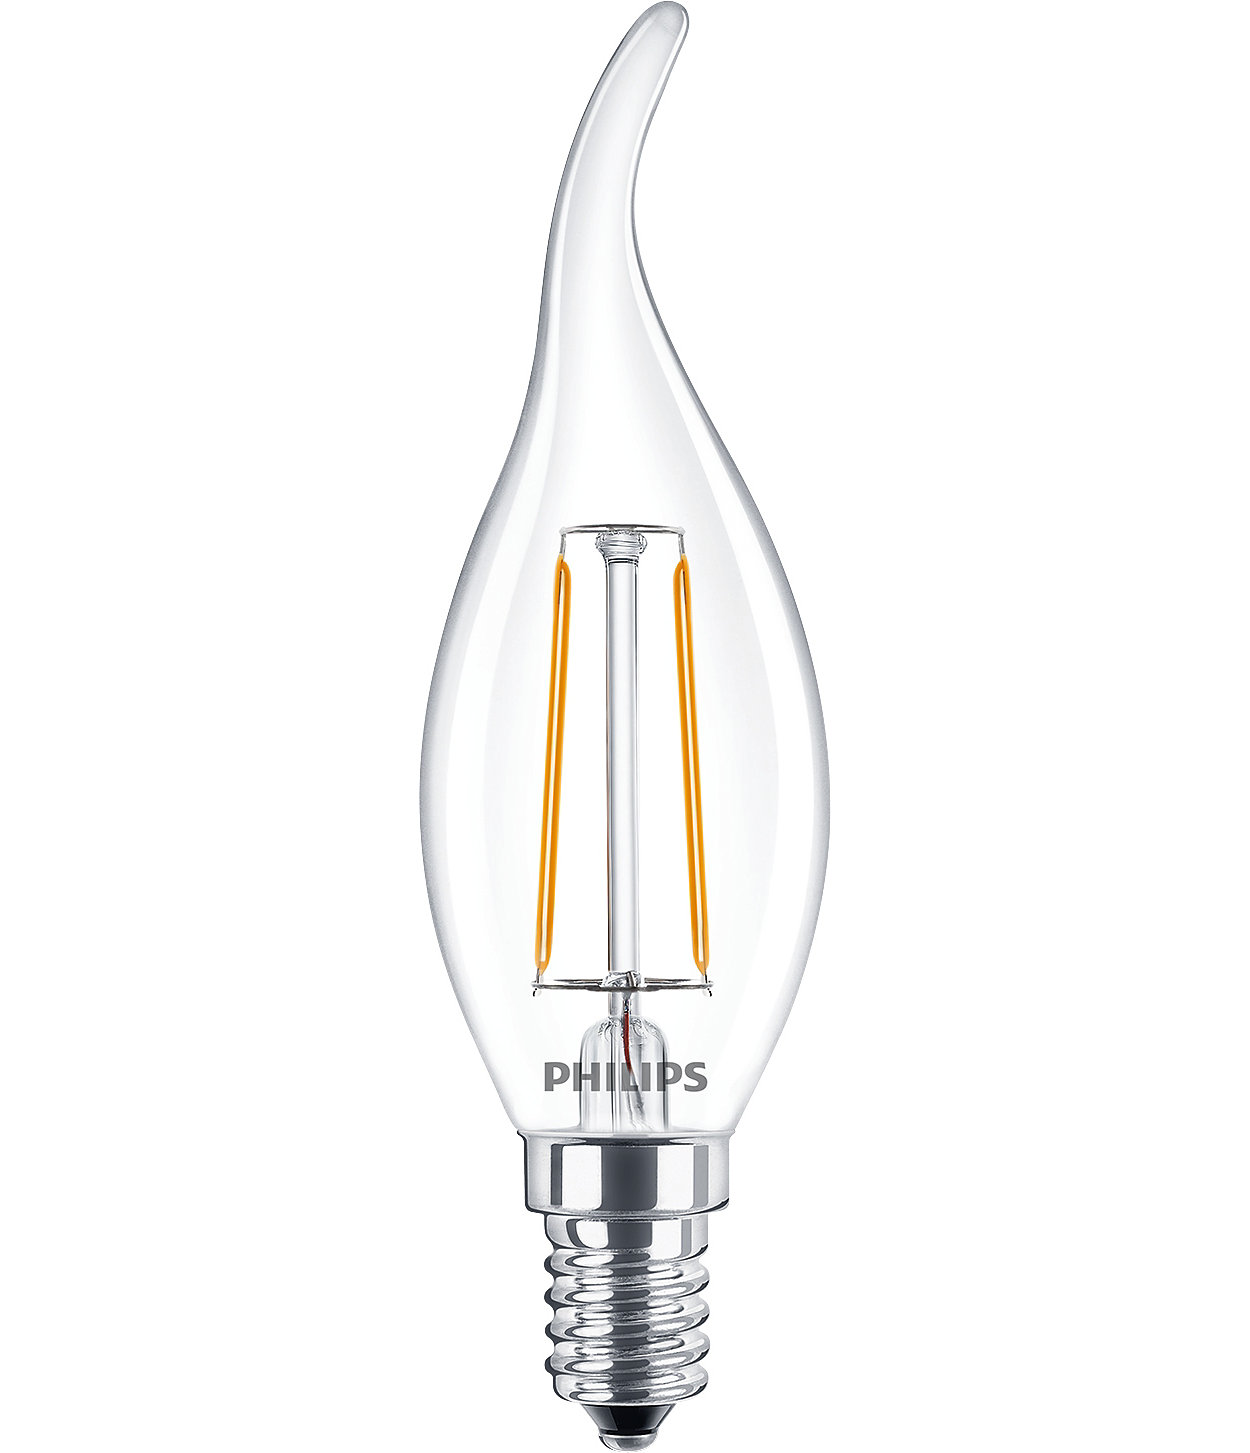 Classic look & feel and LED filament for decorative lighting